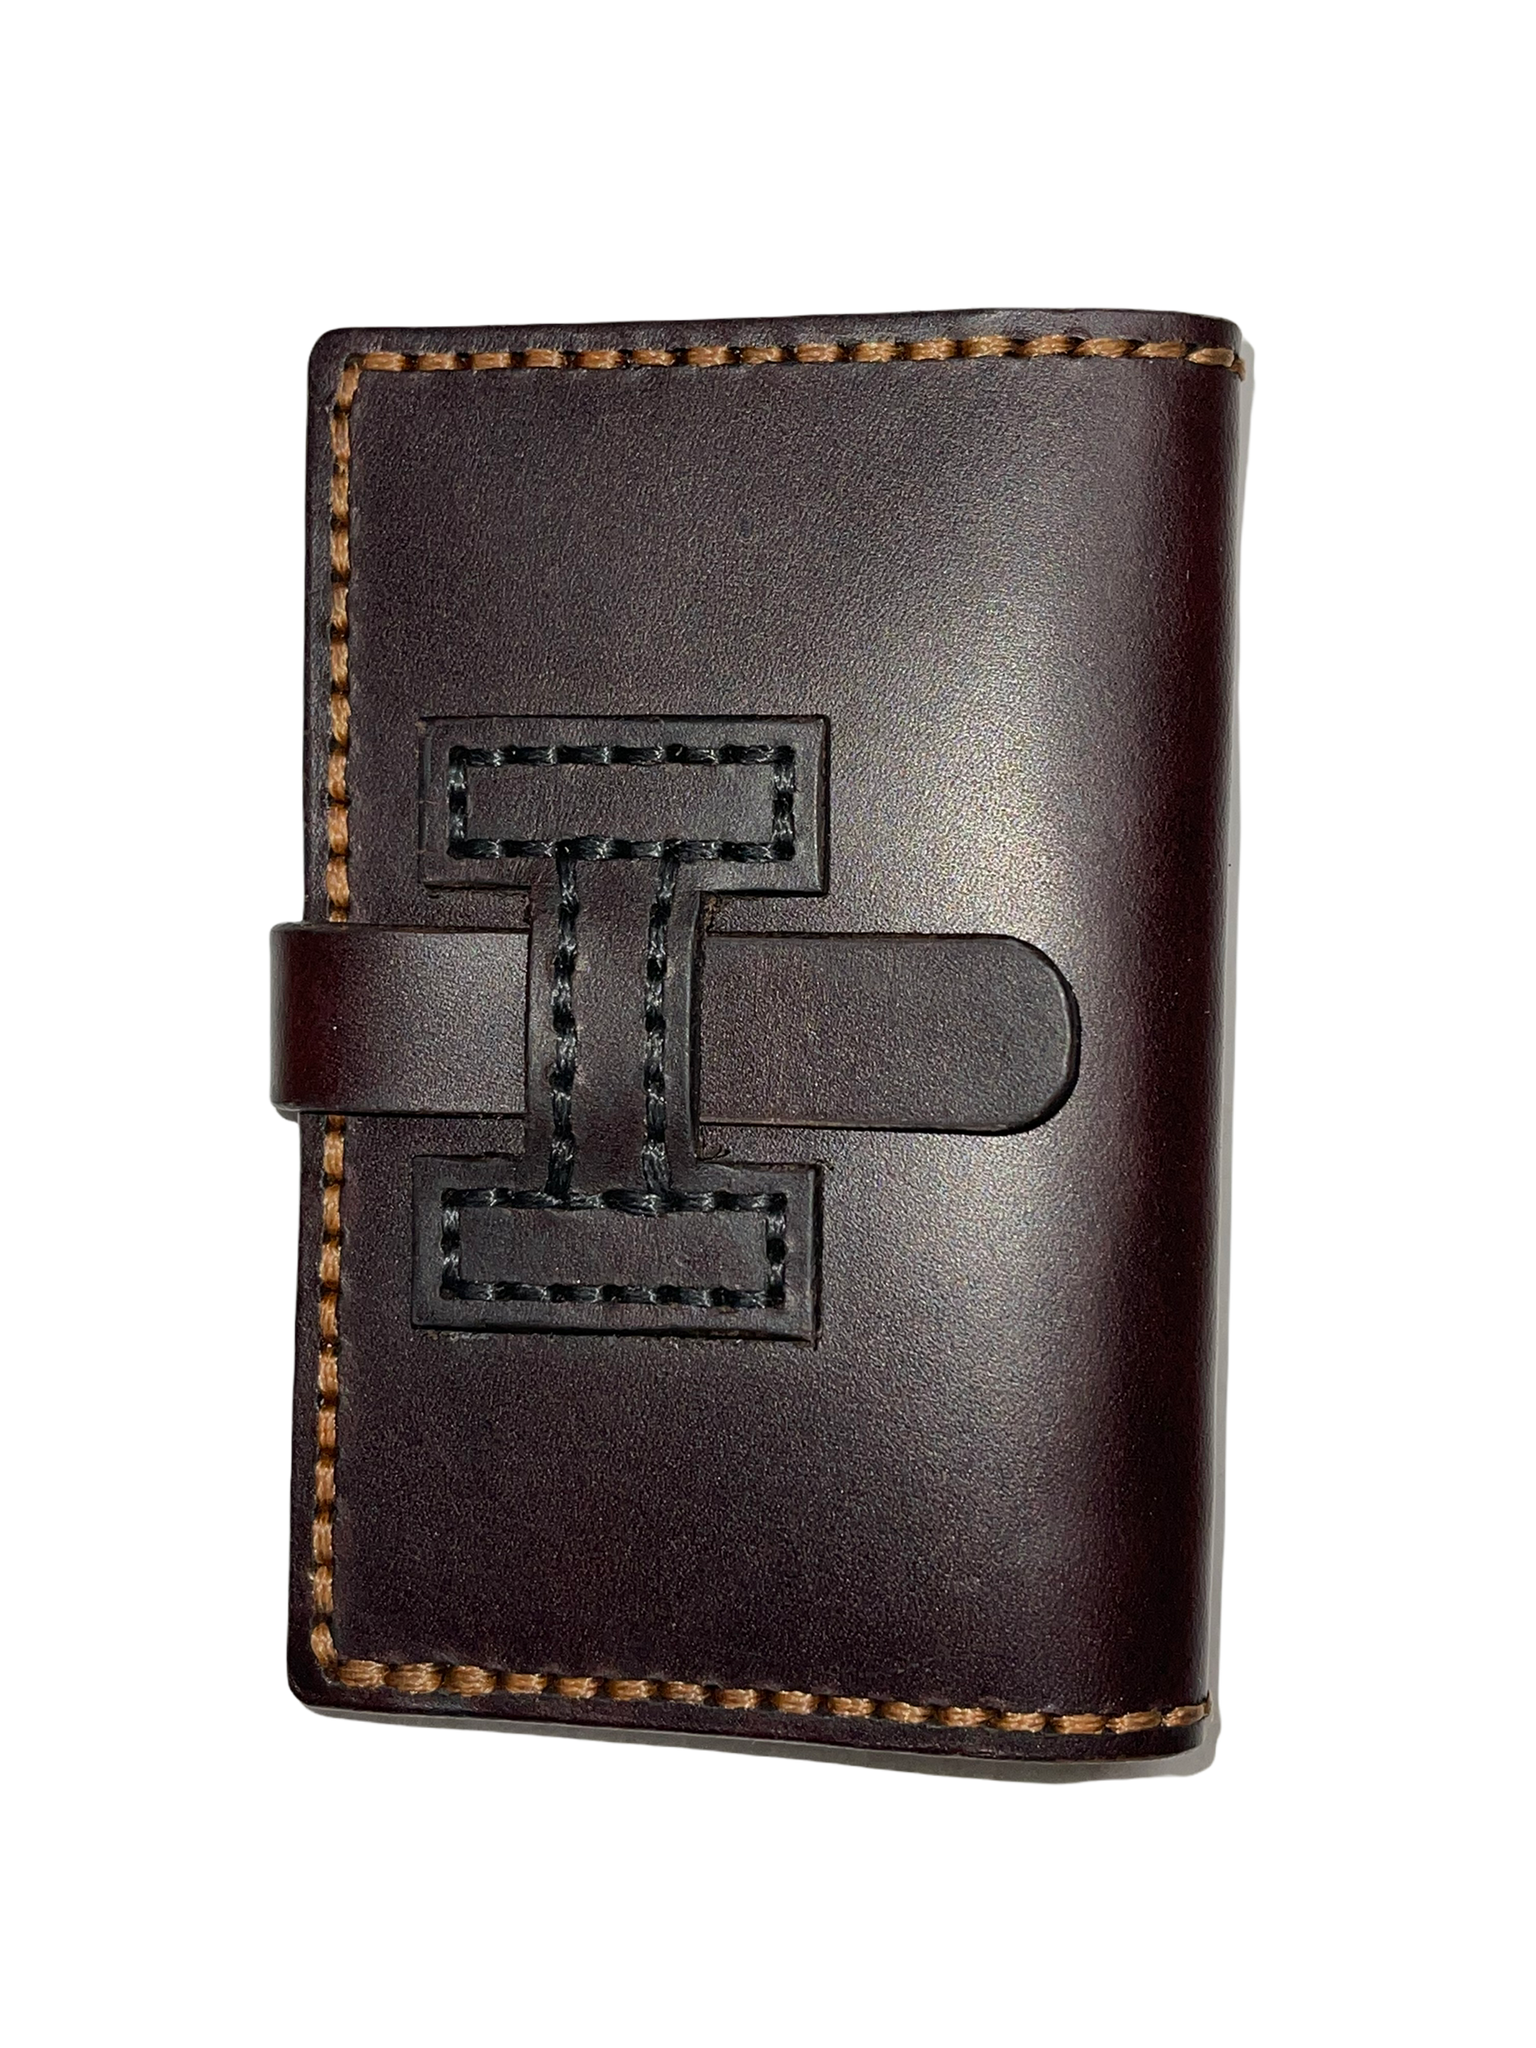 BEARN MINI WALLET - WHAT DO I REALLY THINK OF IT? FULL REVIEW 